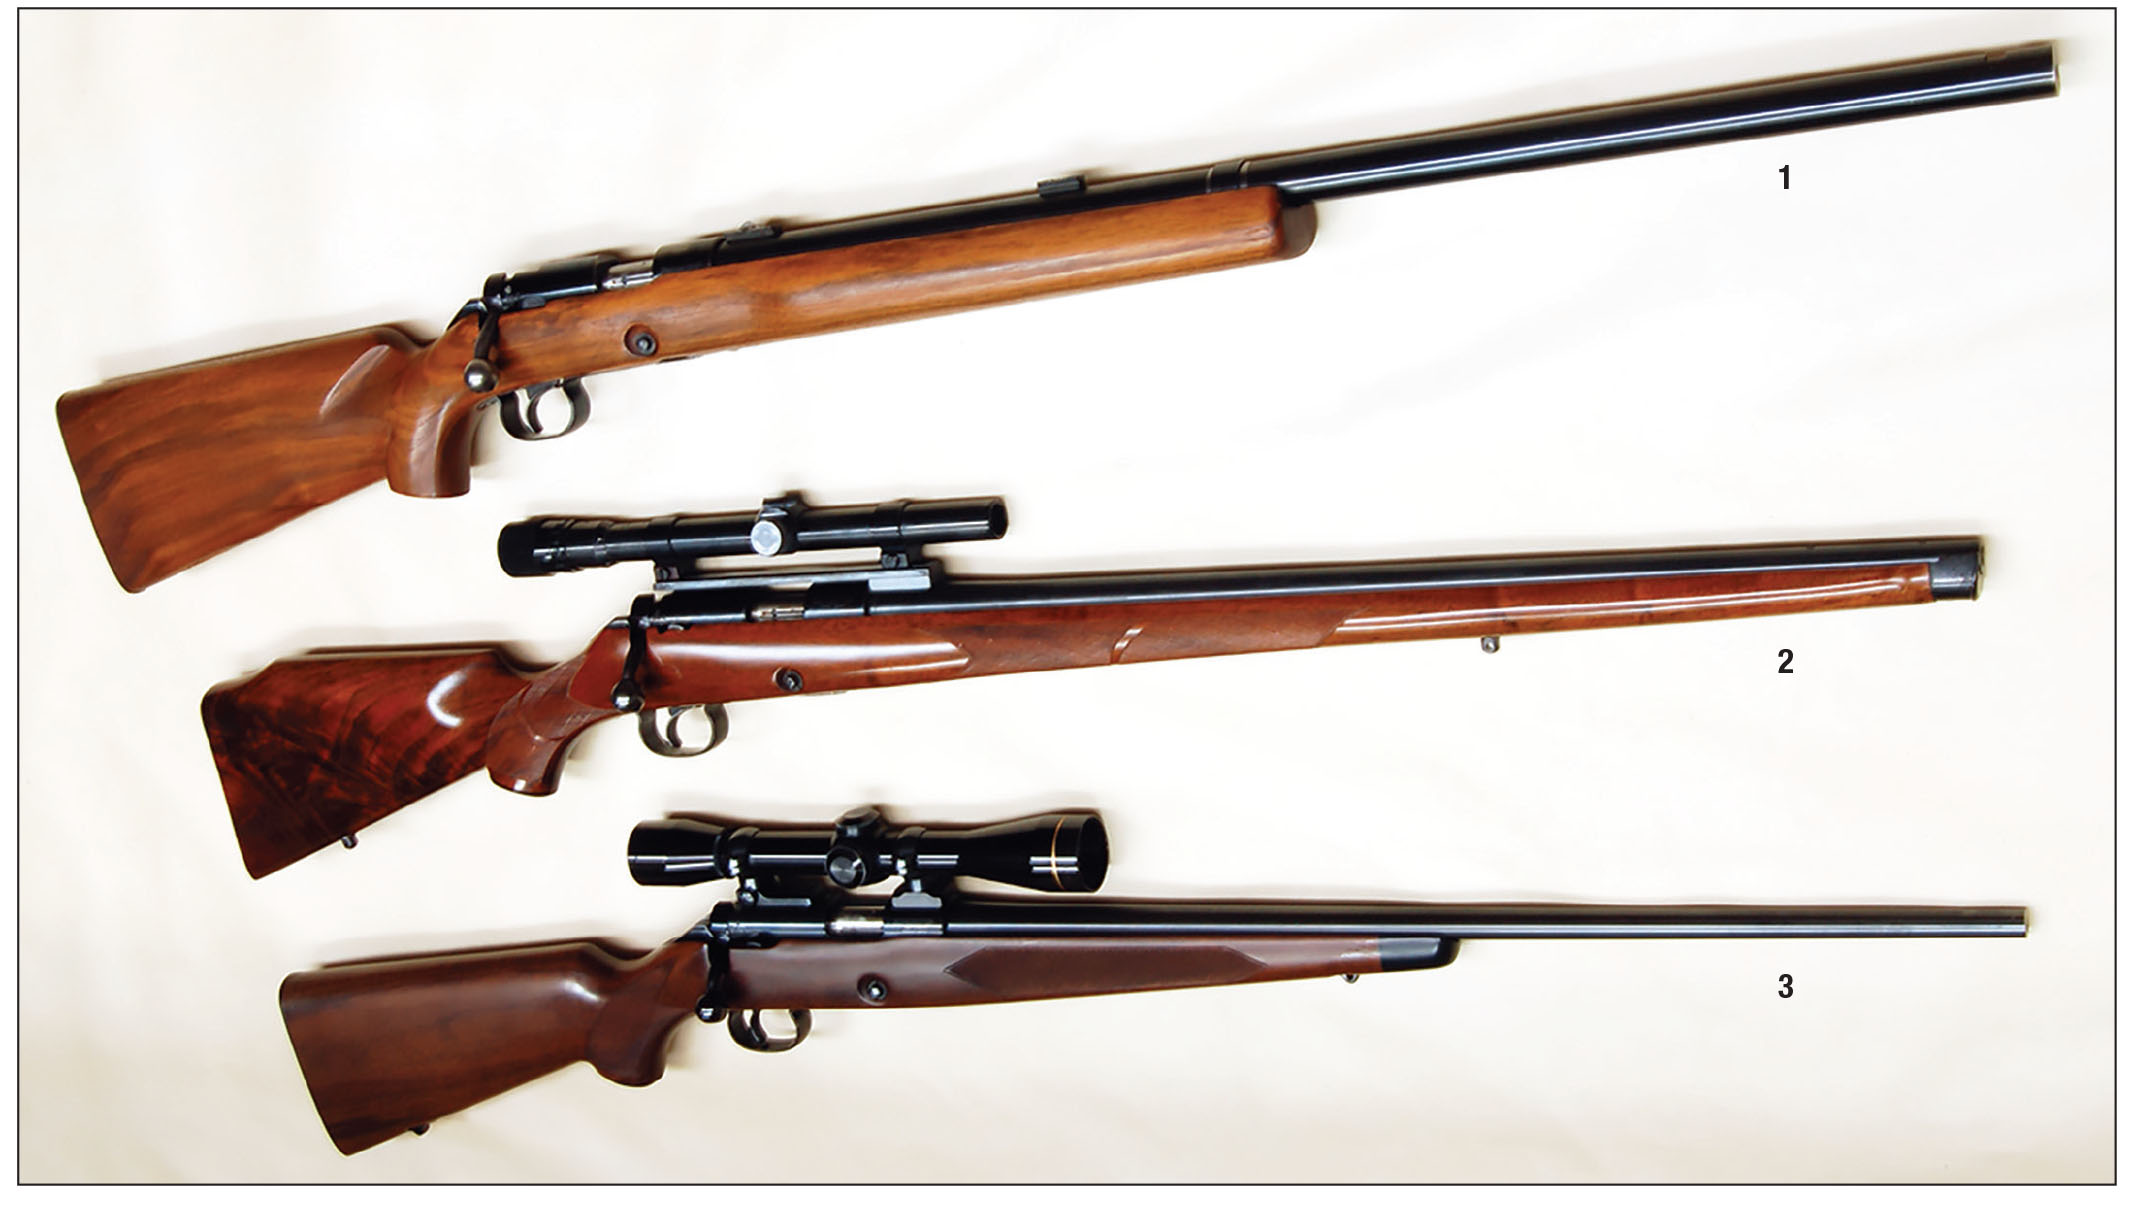 Three classic Model 52s: (1) A heavy barrel target, (2) a sporter built from a target rifle by an Iowa gunsmith and (3) a Winchester Sporter.